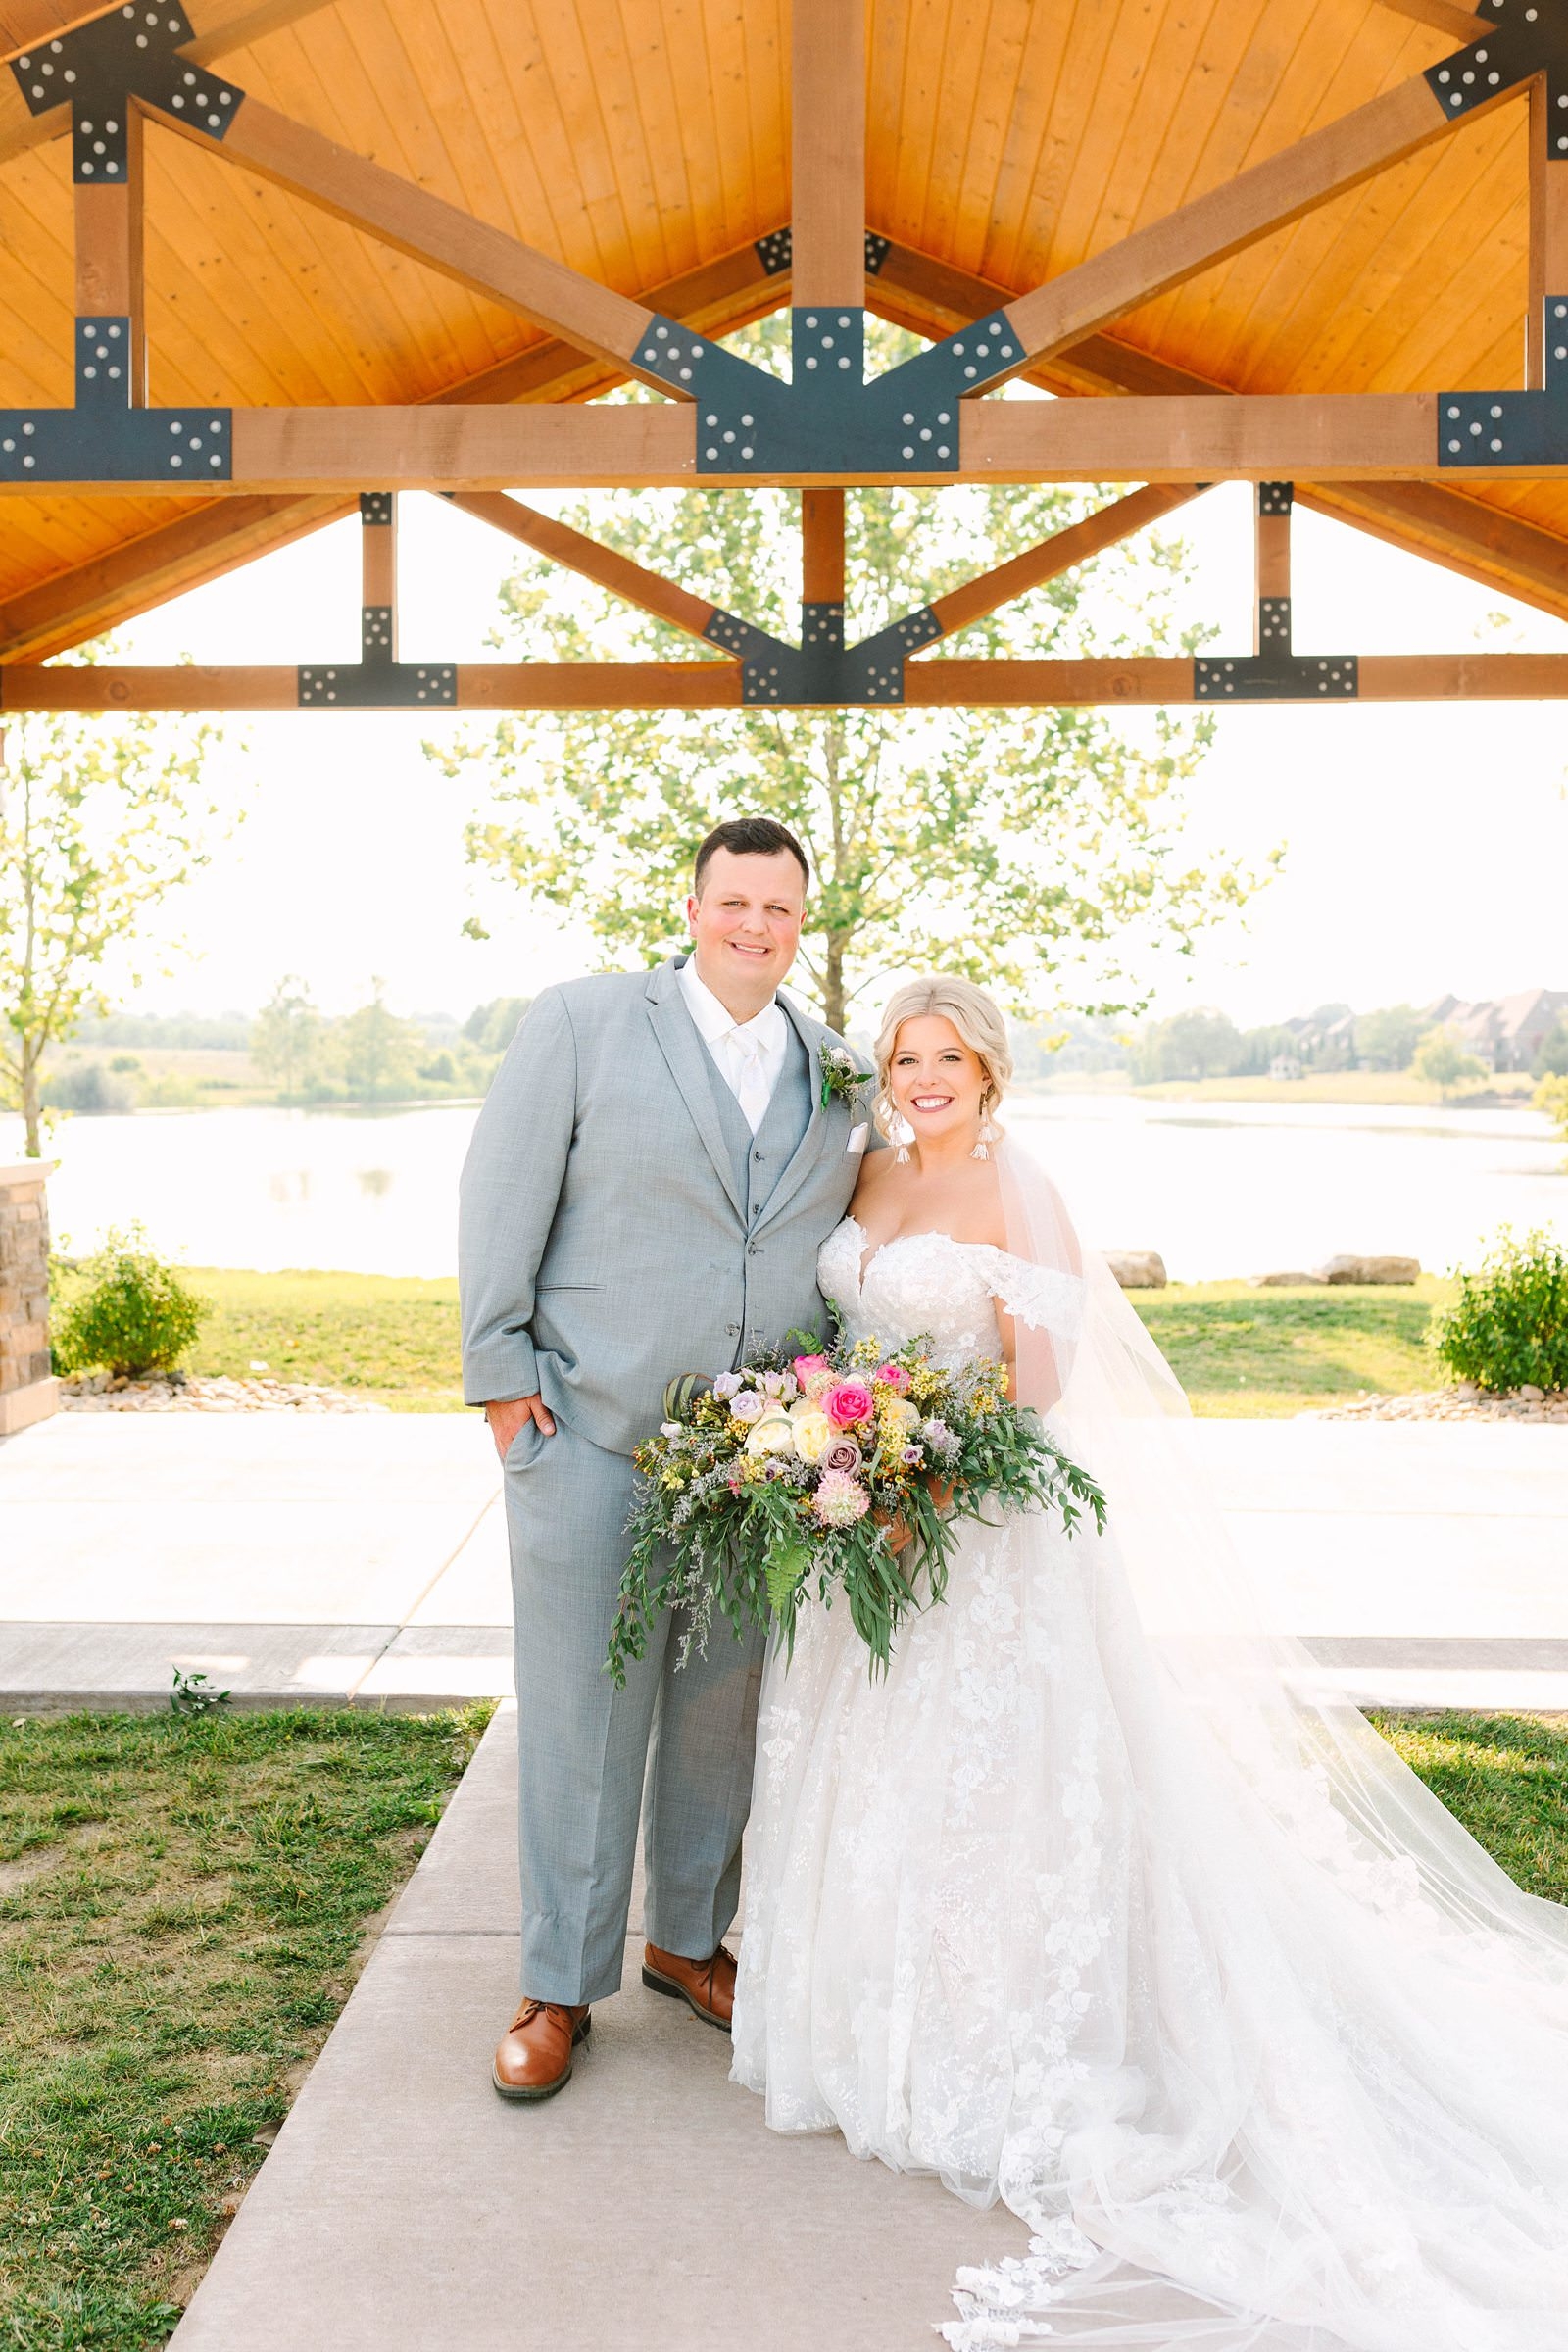 A Sunny Summer Wedding at Friedman Park in Newburgh Indiana | Paige and Dylan | Bret and Brandie Photography146.jpg